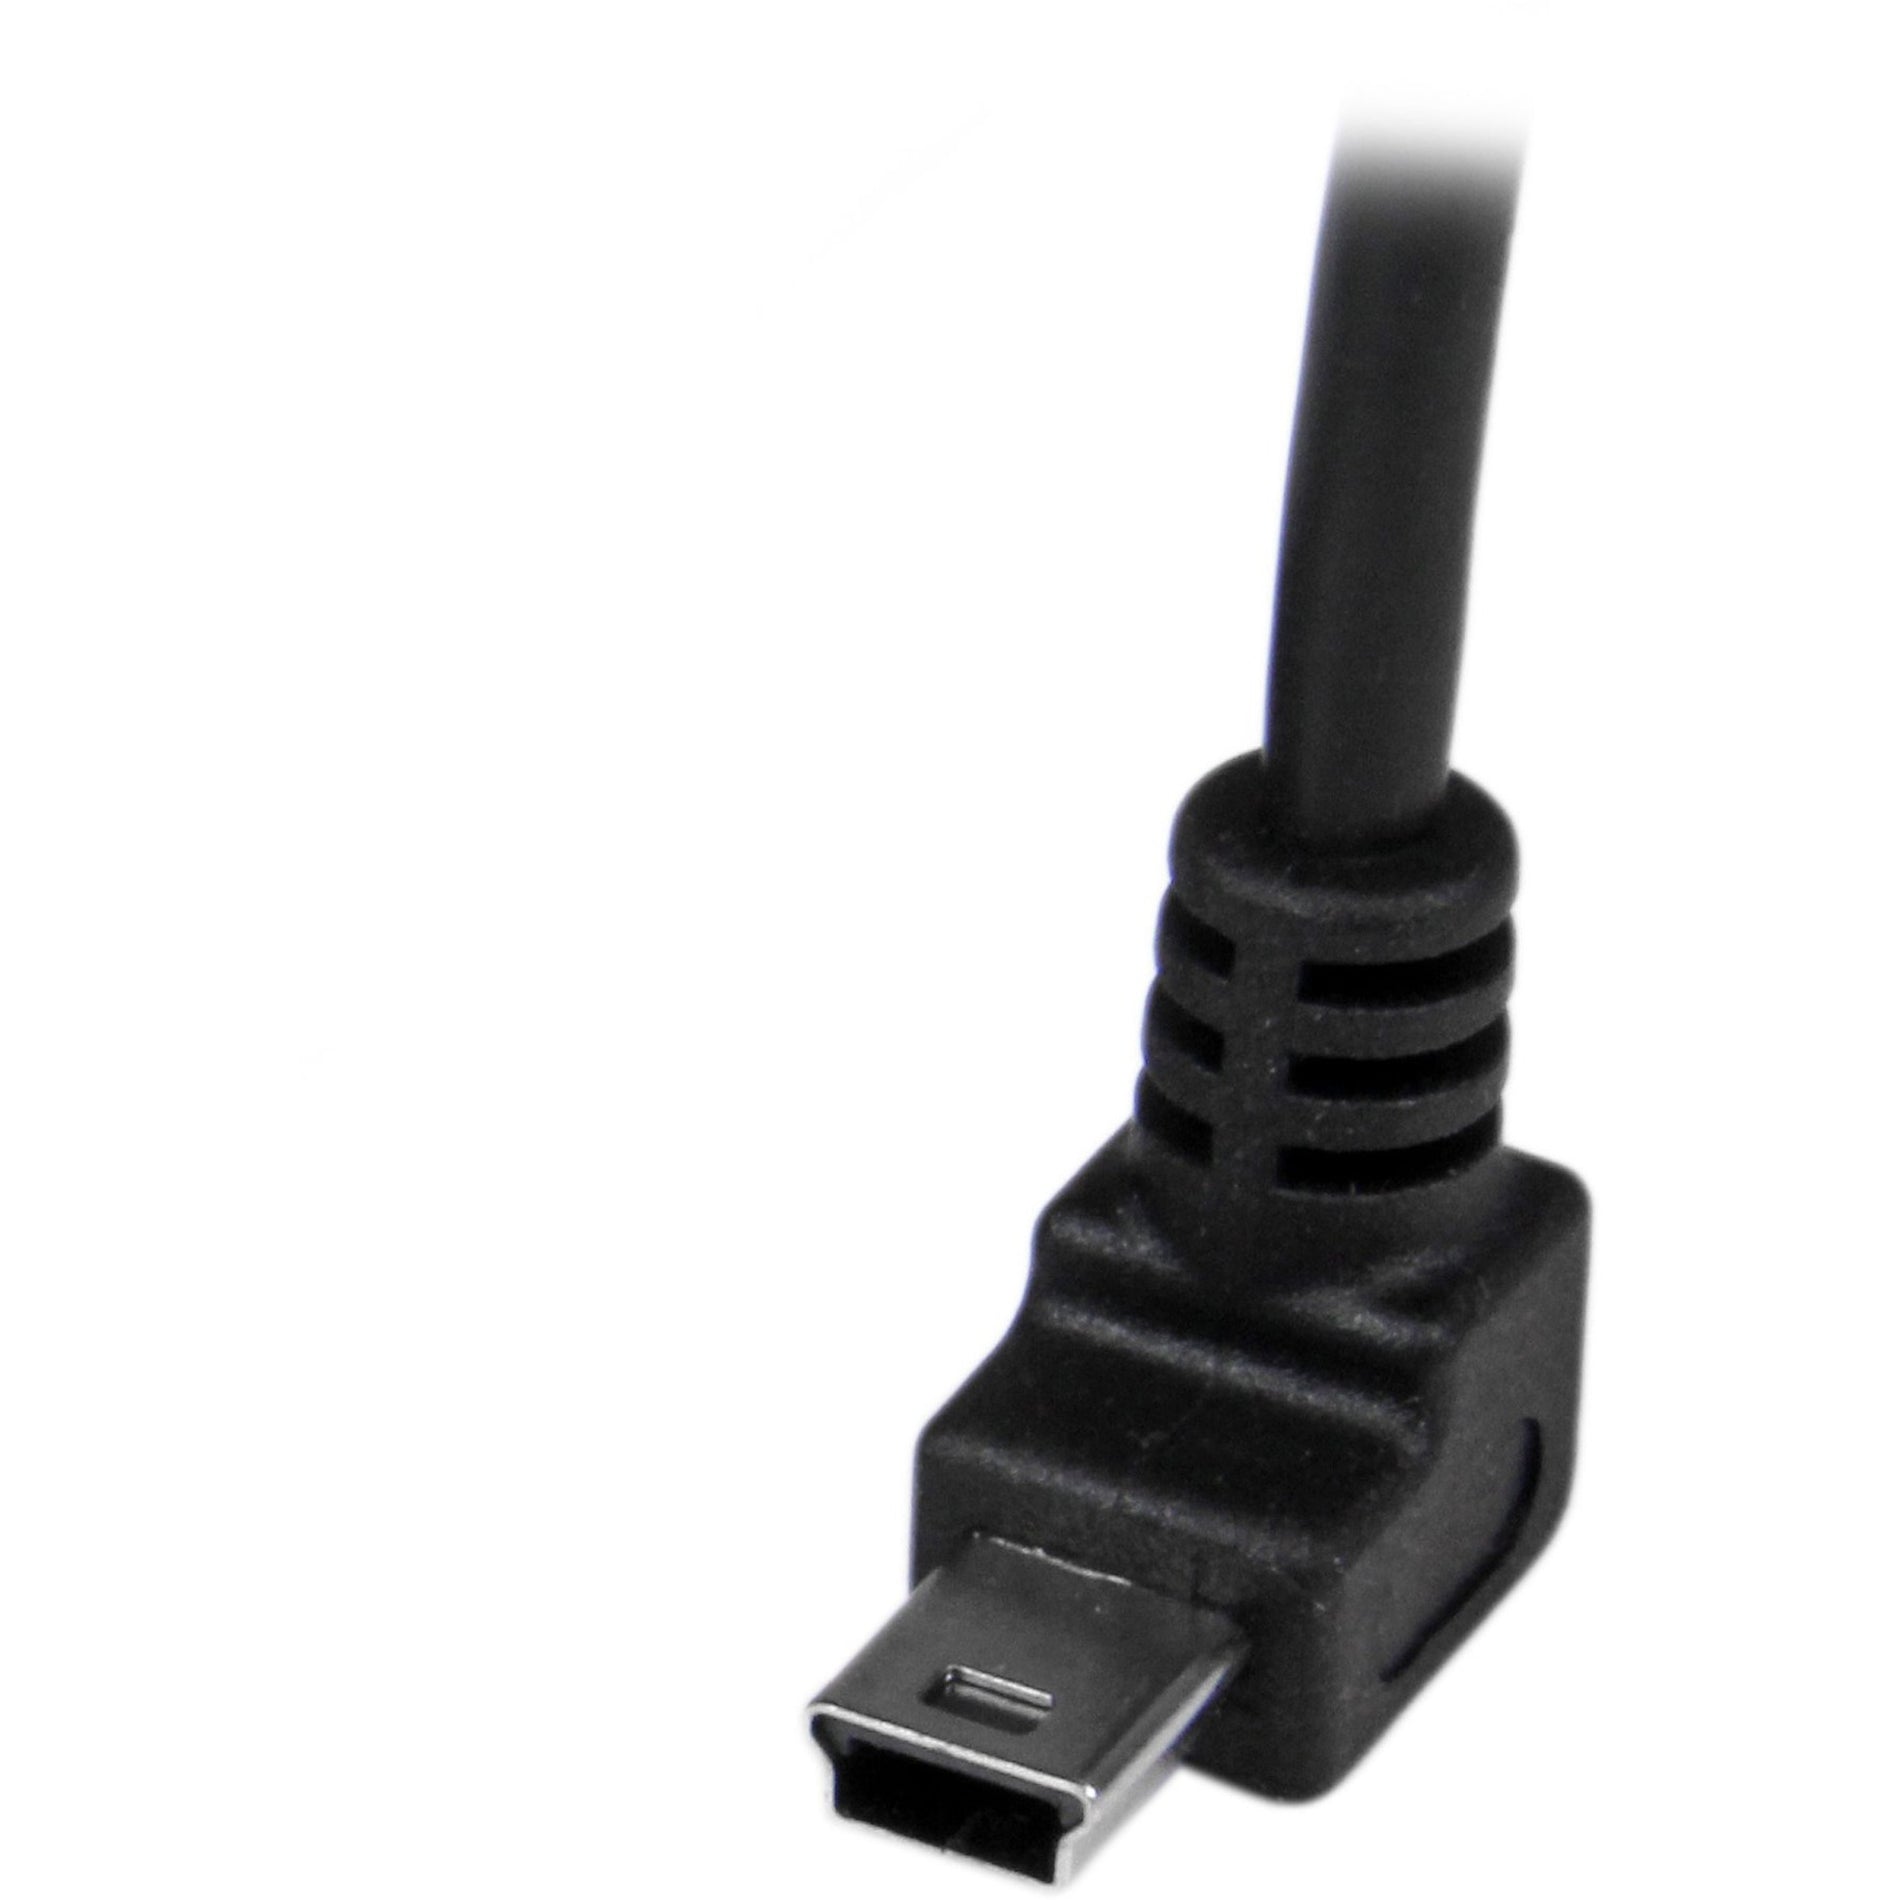 StarTech.com USBAMB1MU 1m Mini USB Cable - A to Up Angle Mini B, Data Transfer Cable, 3.28 ft, Strain Relief, Molded, Black